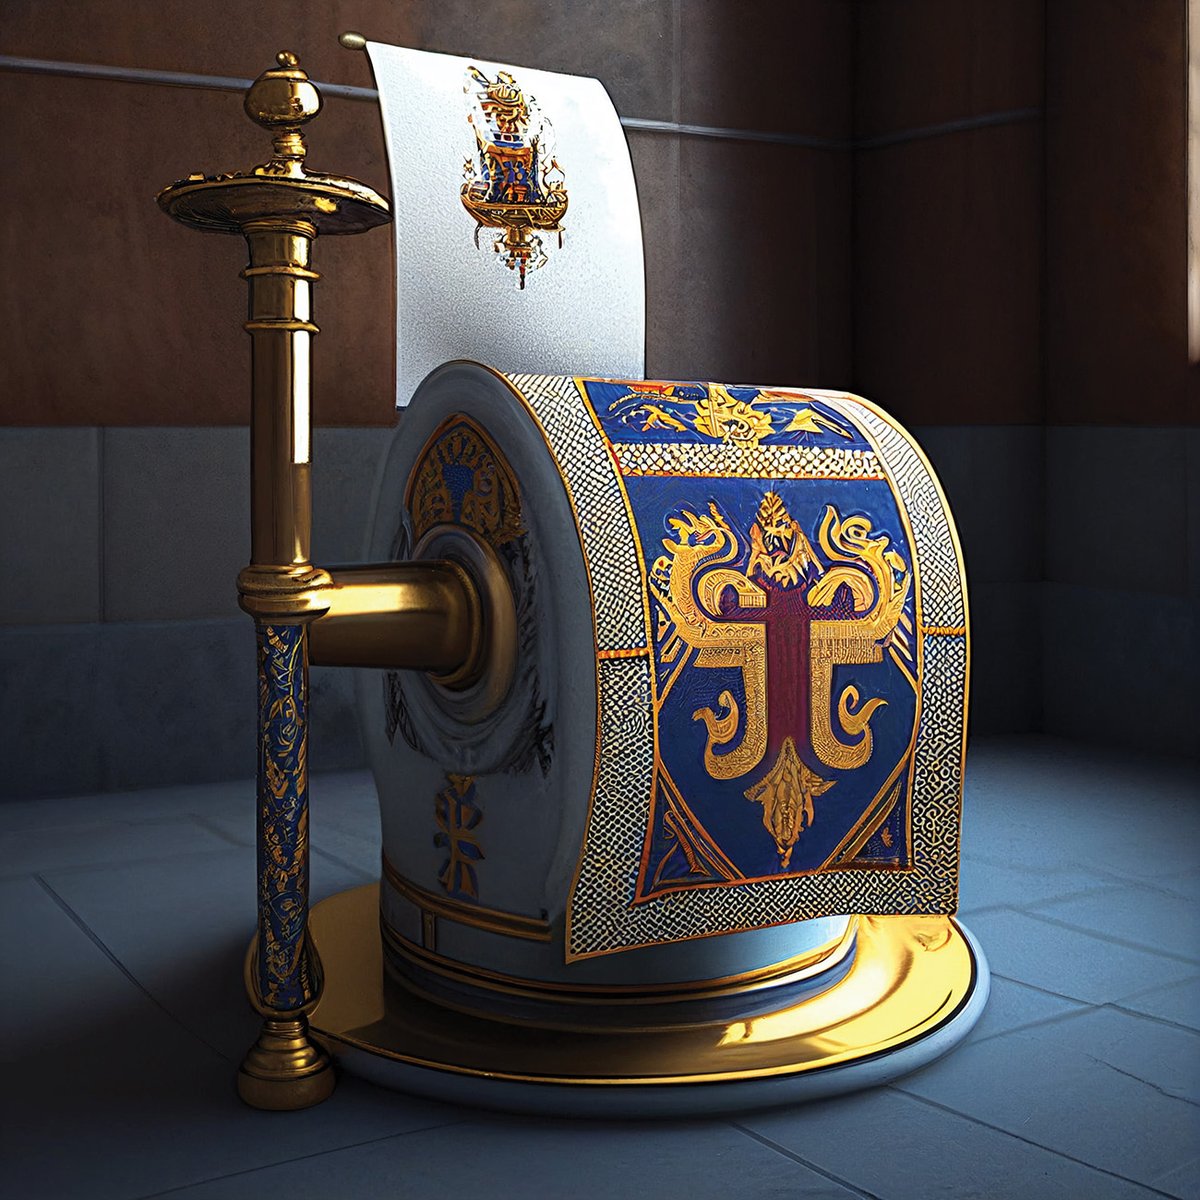 Regal 12-ply toilet paper with hand printed gold embroidery. 5k a sheet. Ideal for dealing with a heavy afternoon session following a grouse and muesli breakfast or a busy coronation weekend. #CoronationWeekend